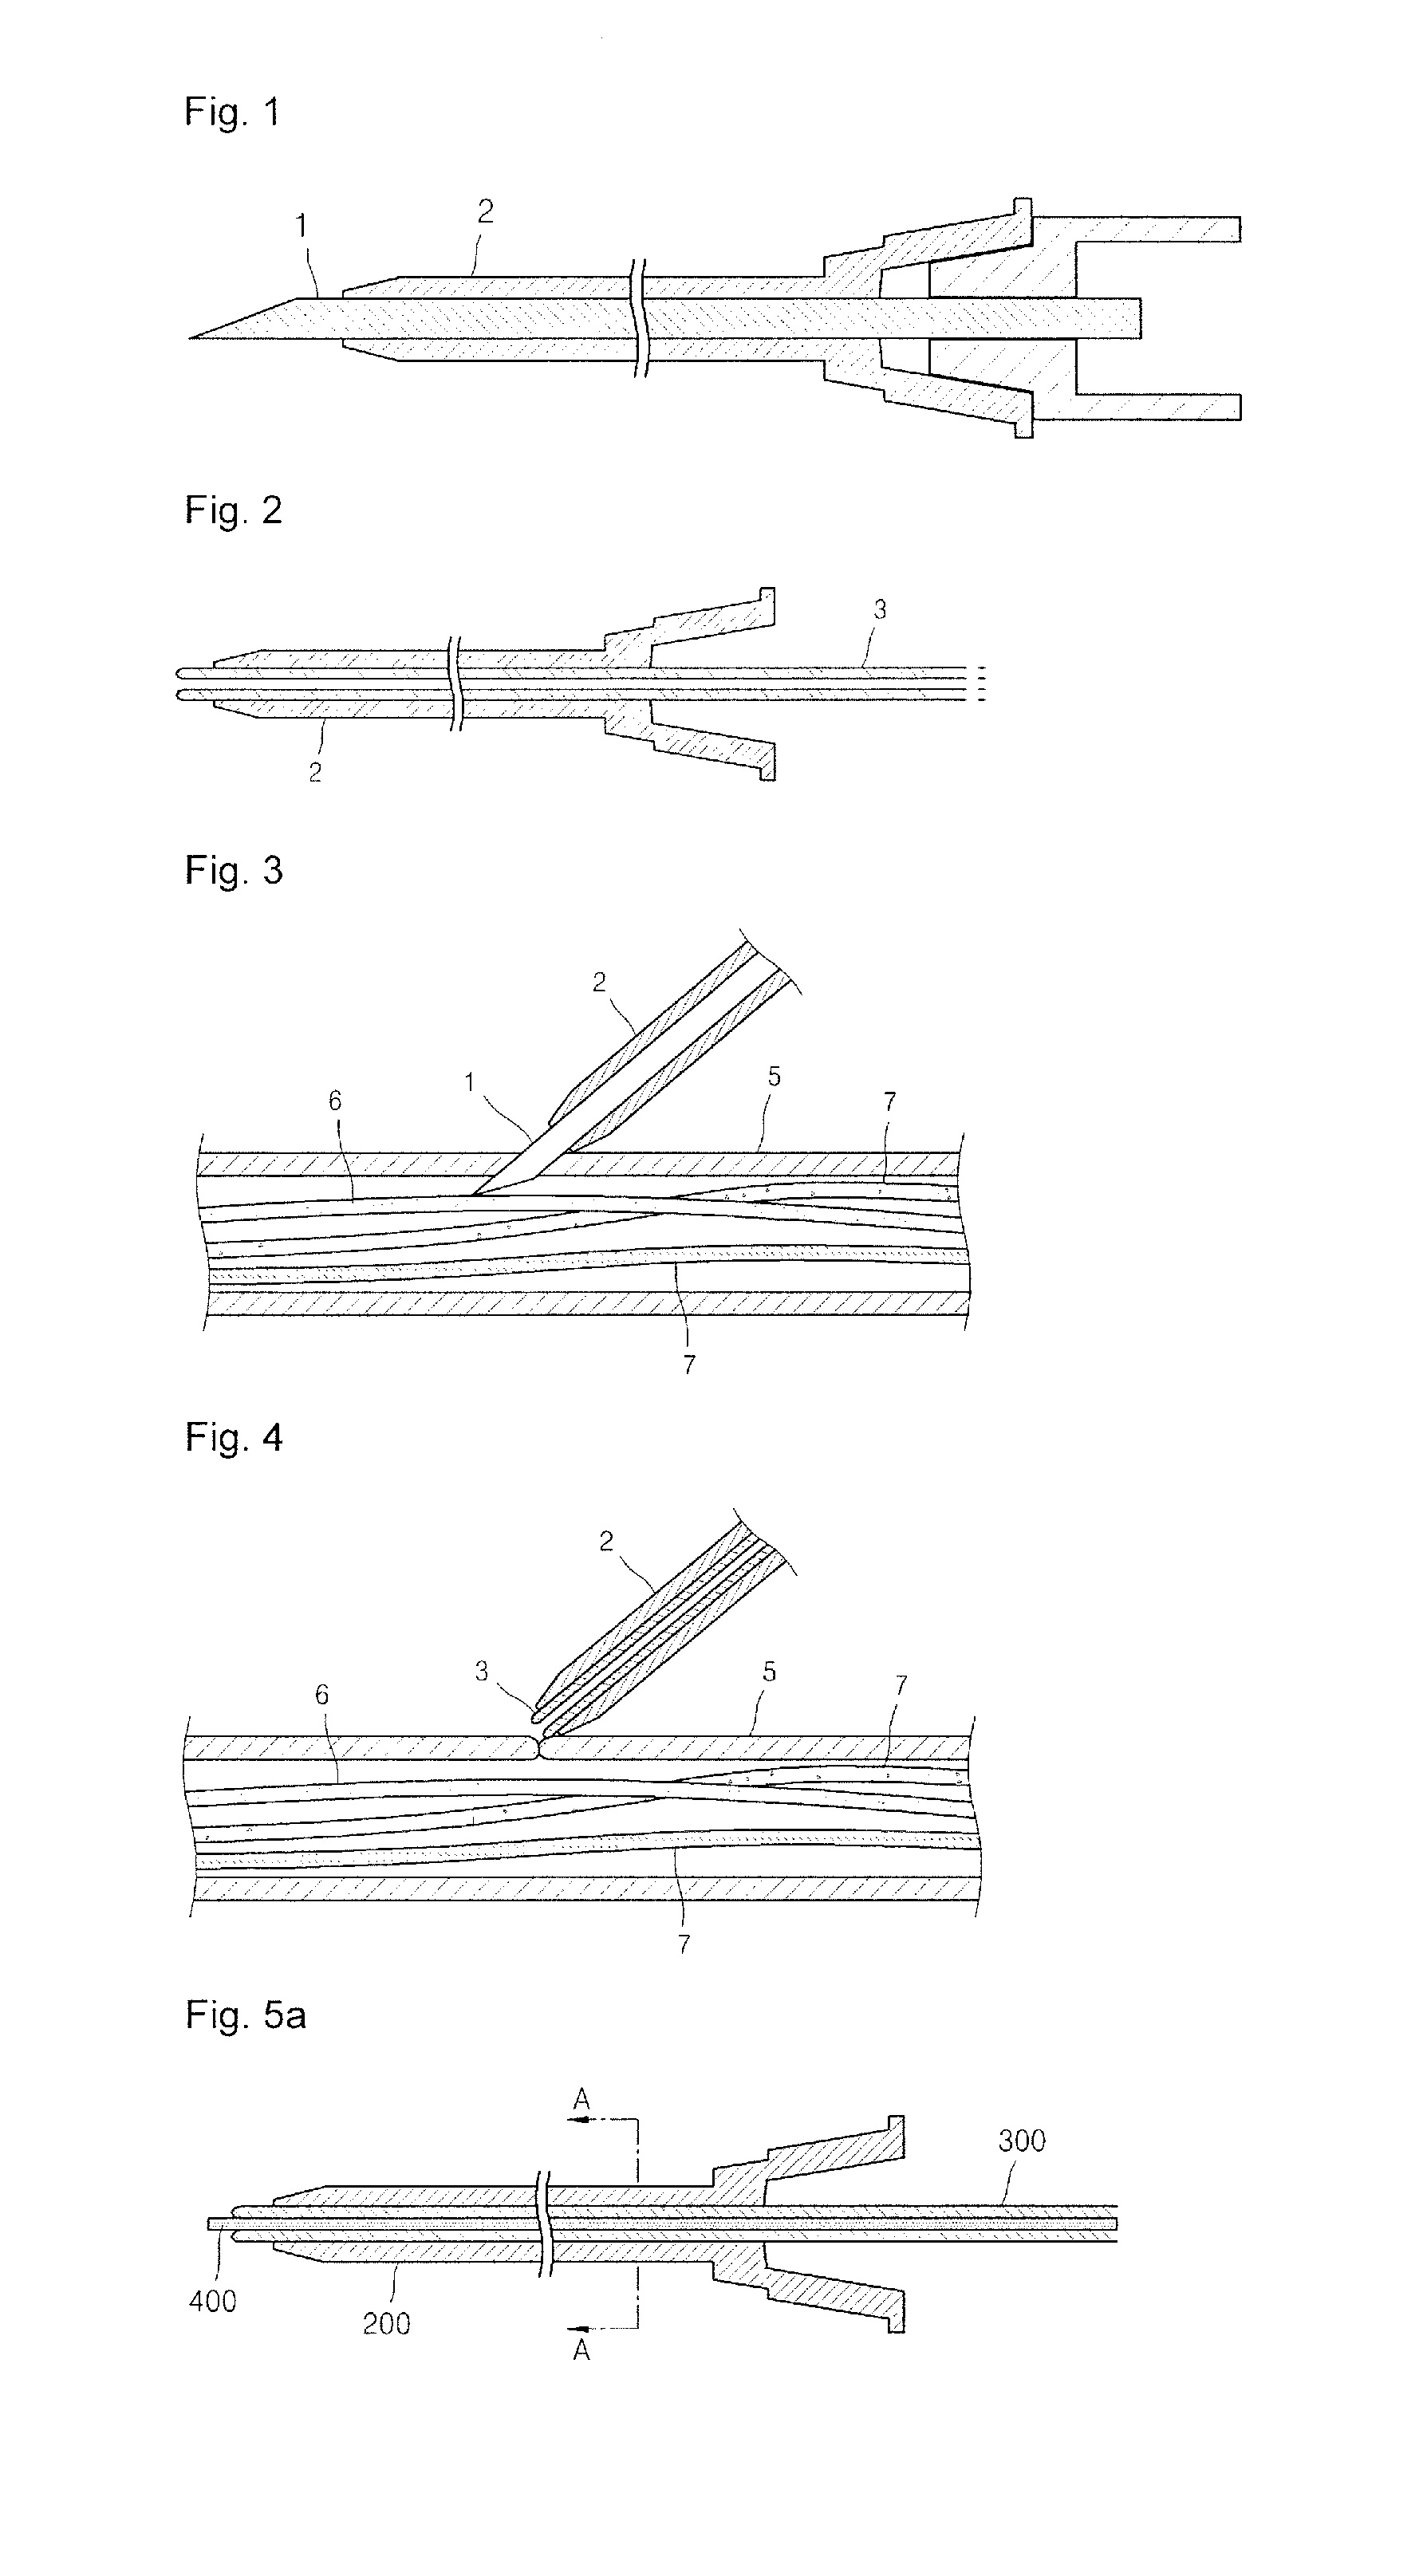 Catheter set comprising guide wire